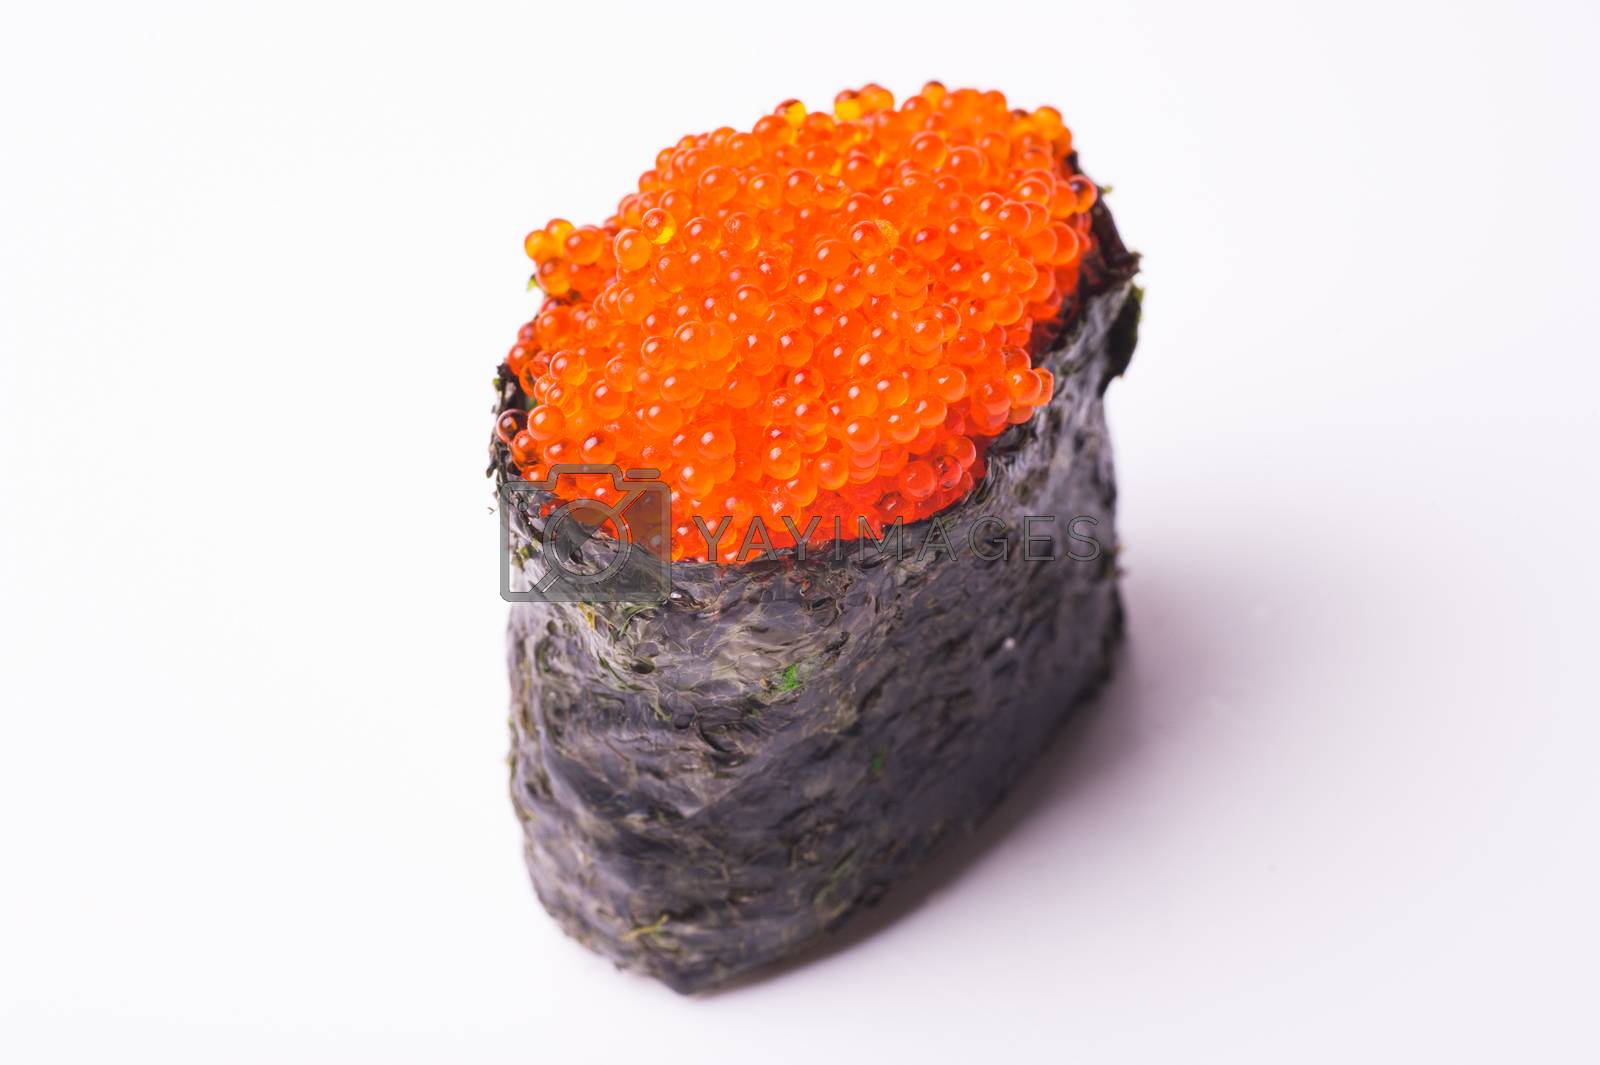 Royalty free image of flying fish caviar sushi on white background  by fesenko